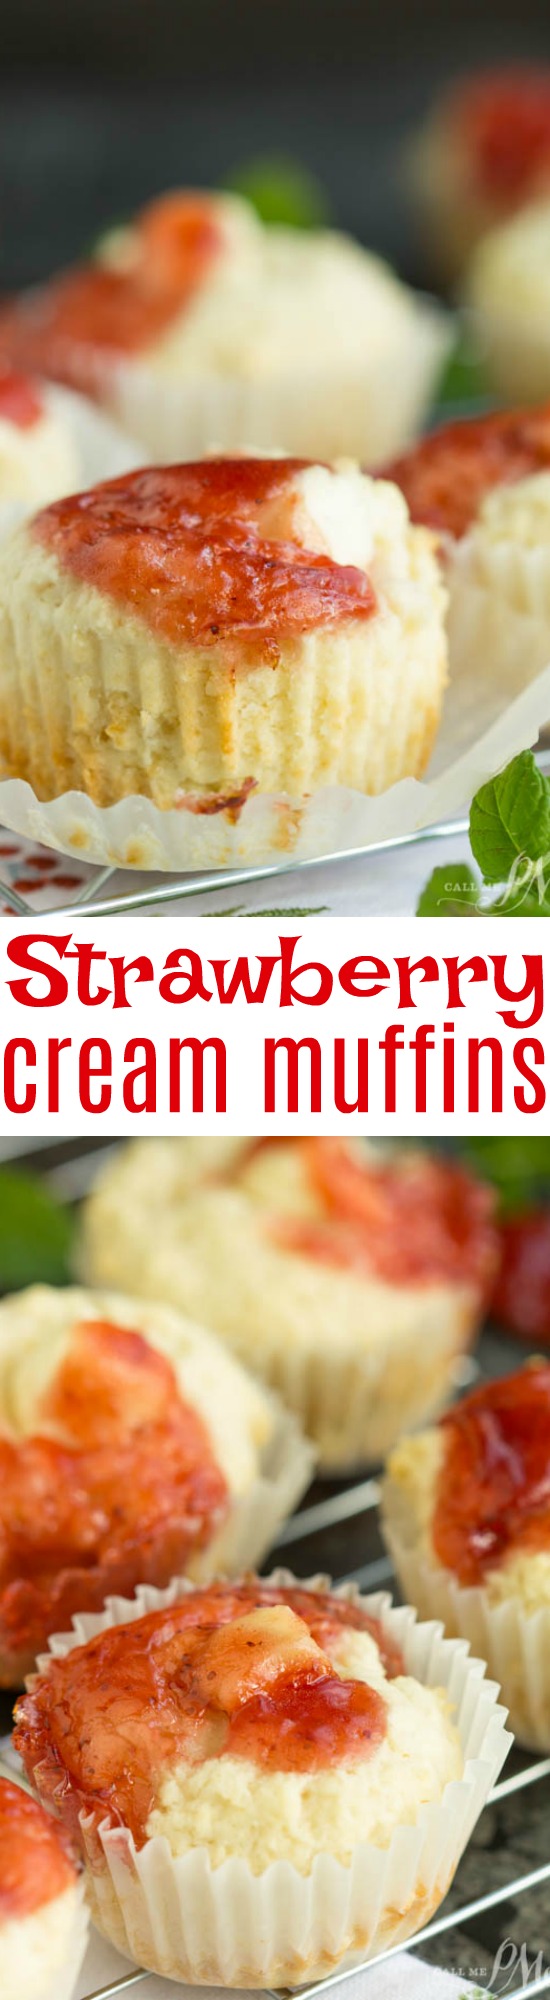 collage of two phtoos of muffins with strawberry and cream on top.